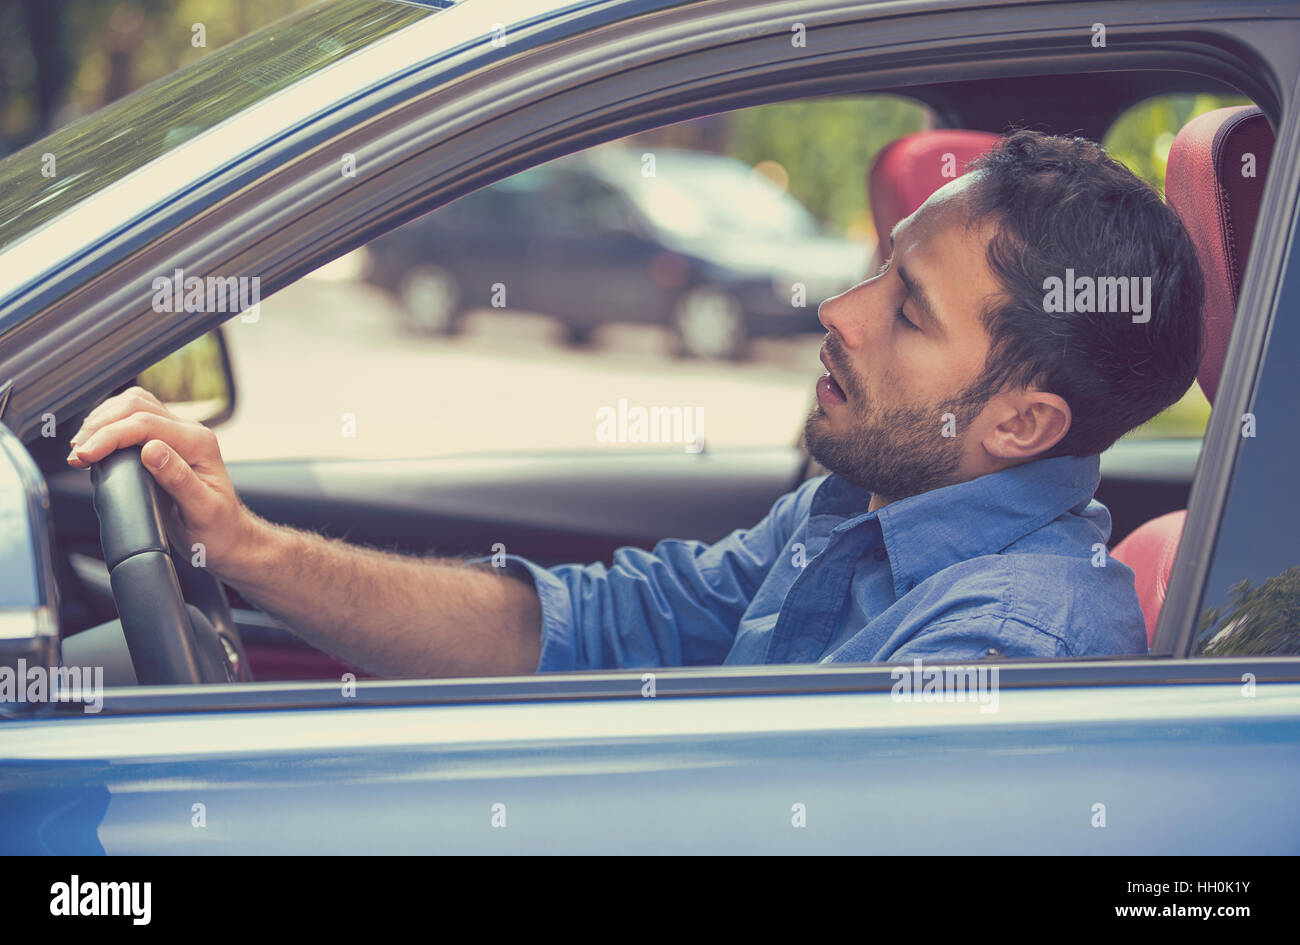 Side view sleepy tired fatigued exhausted man driving car in traffic after long hours. Transportation safety sleep deprivation Stock Photo